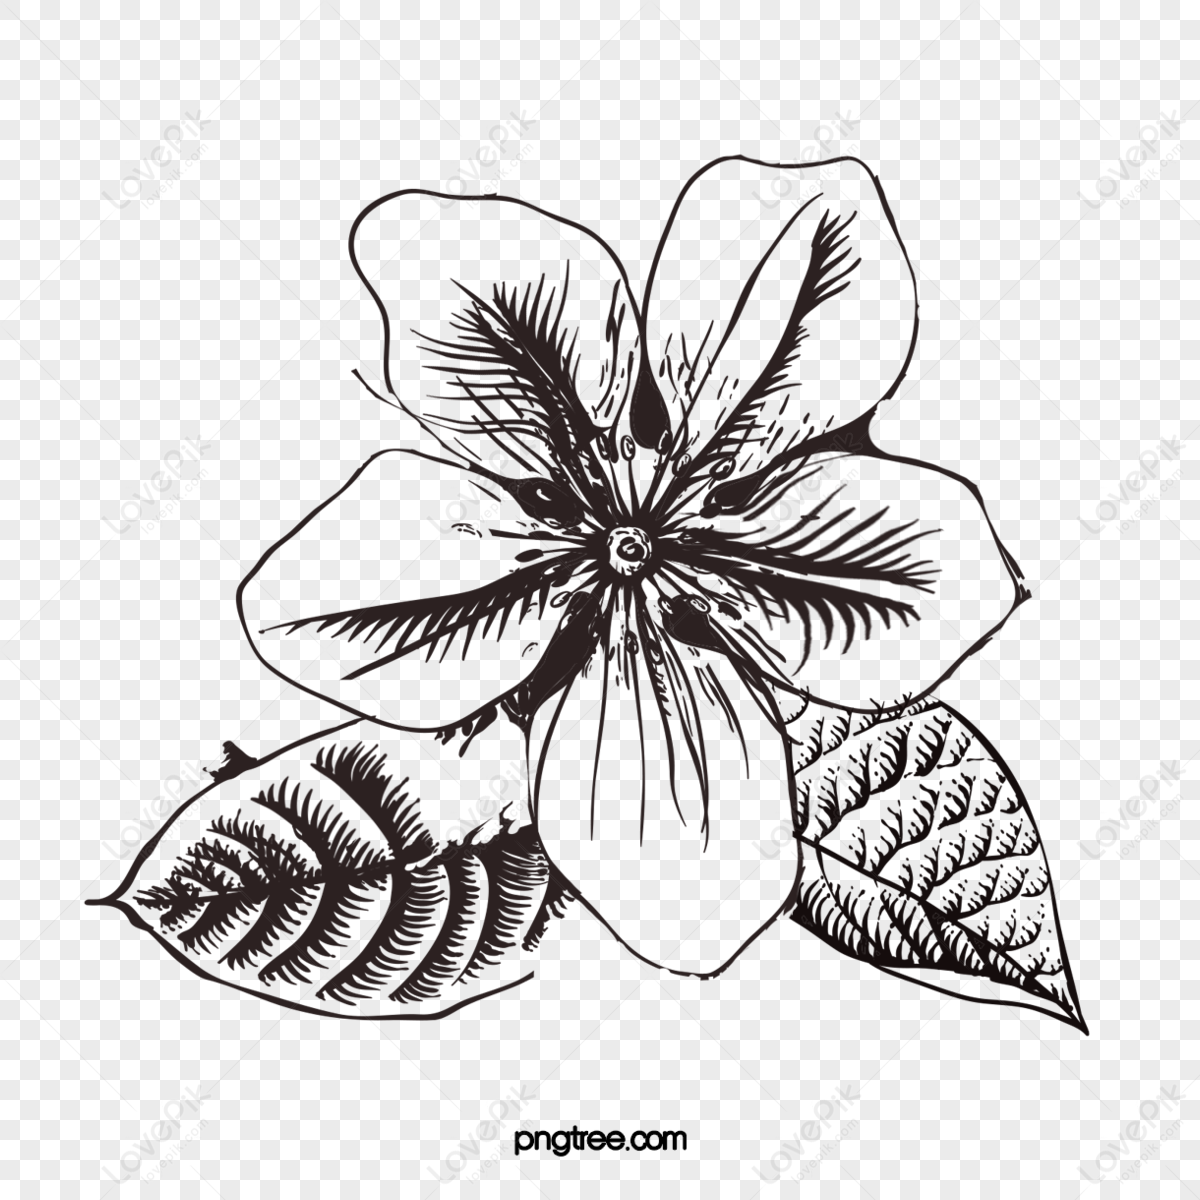 Simple Line Art Drawings of Flowers in Black and White